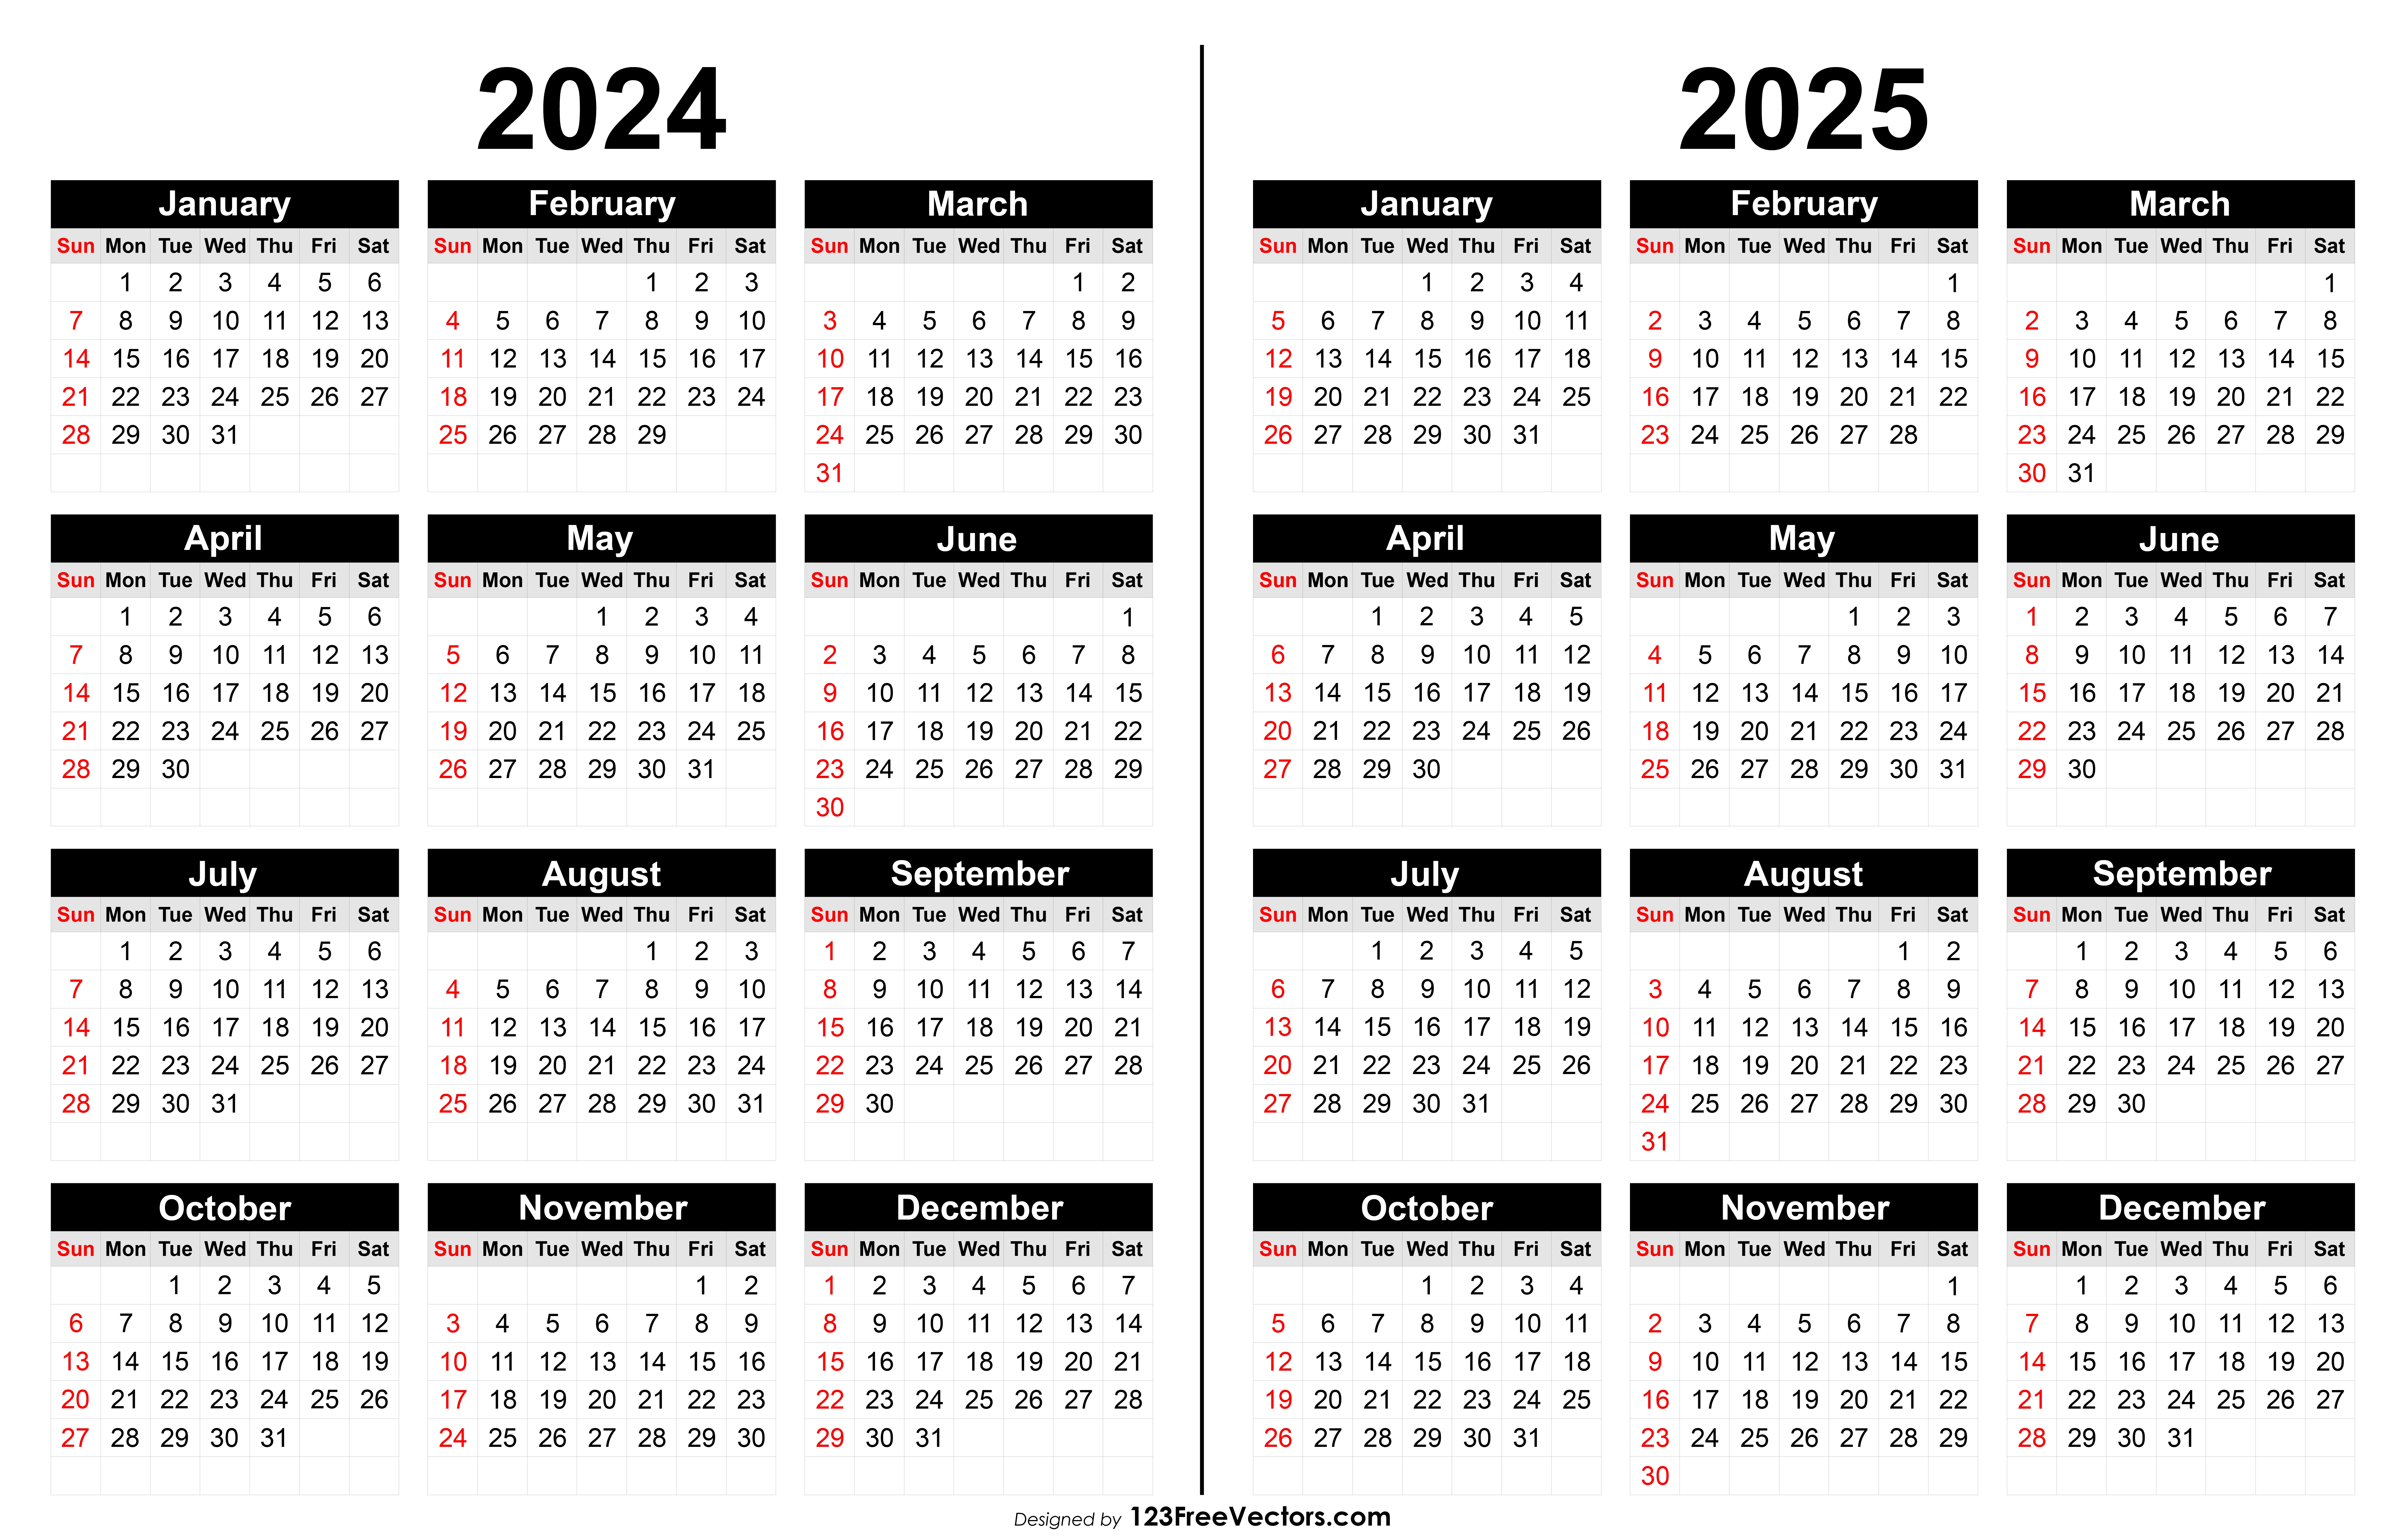 Free 2024 And 2025 Calendar Printable intended for Free Printable Calendar 2024 And 2025 With Holidays